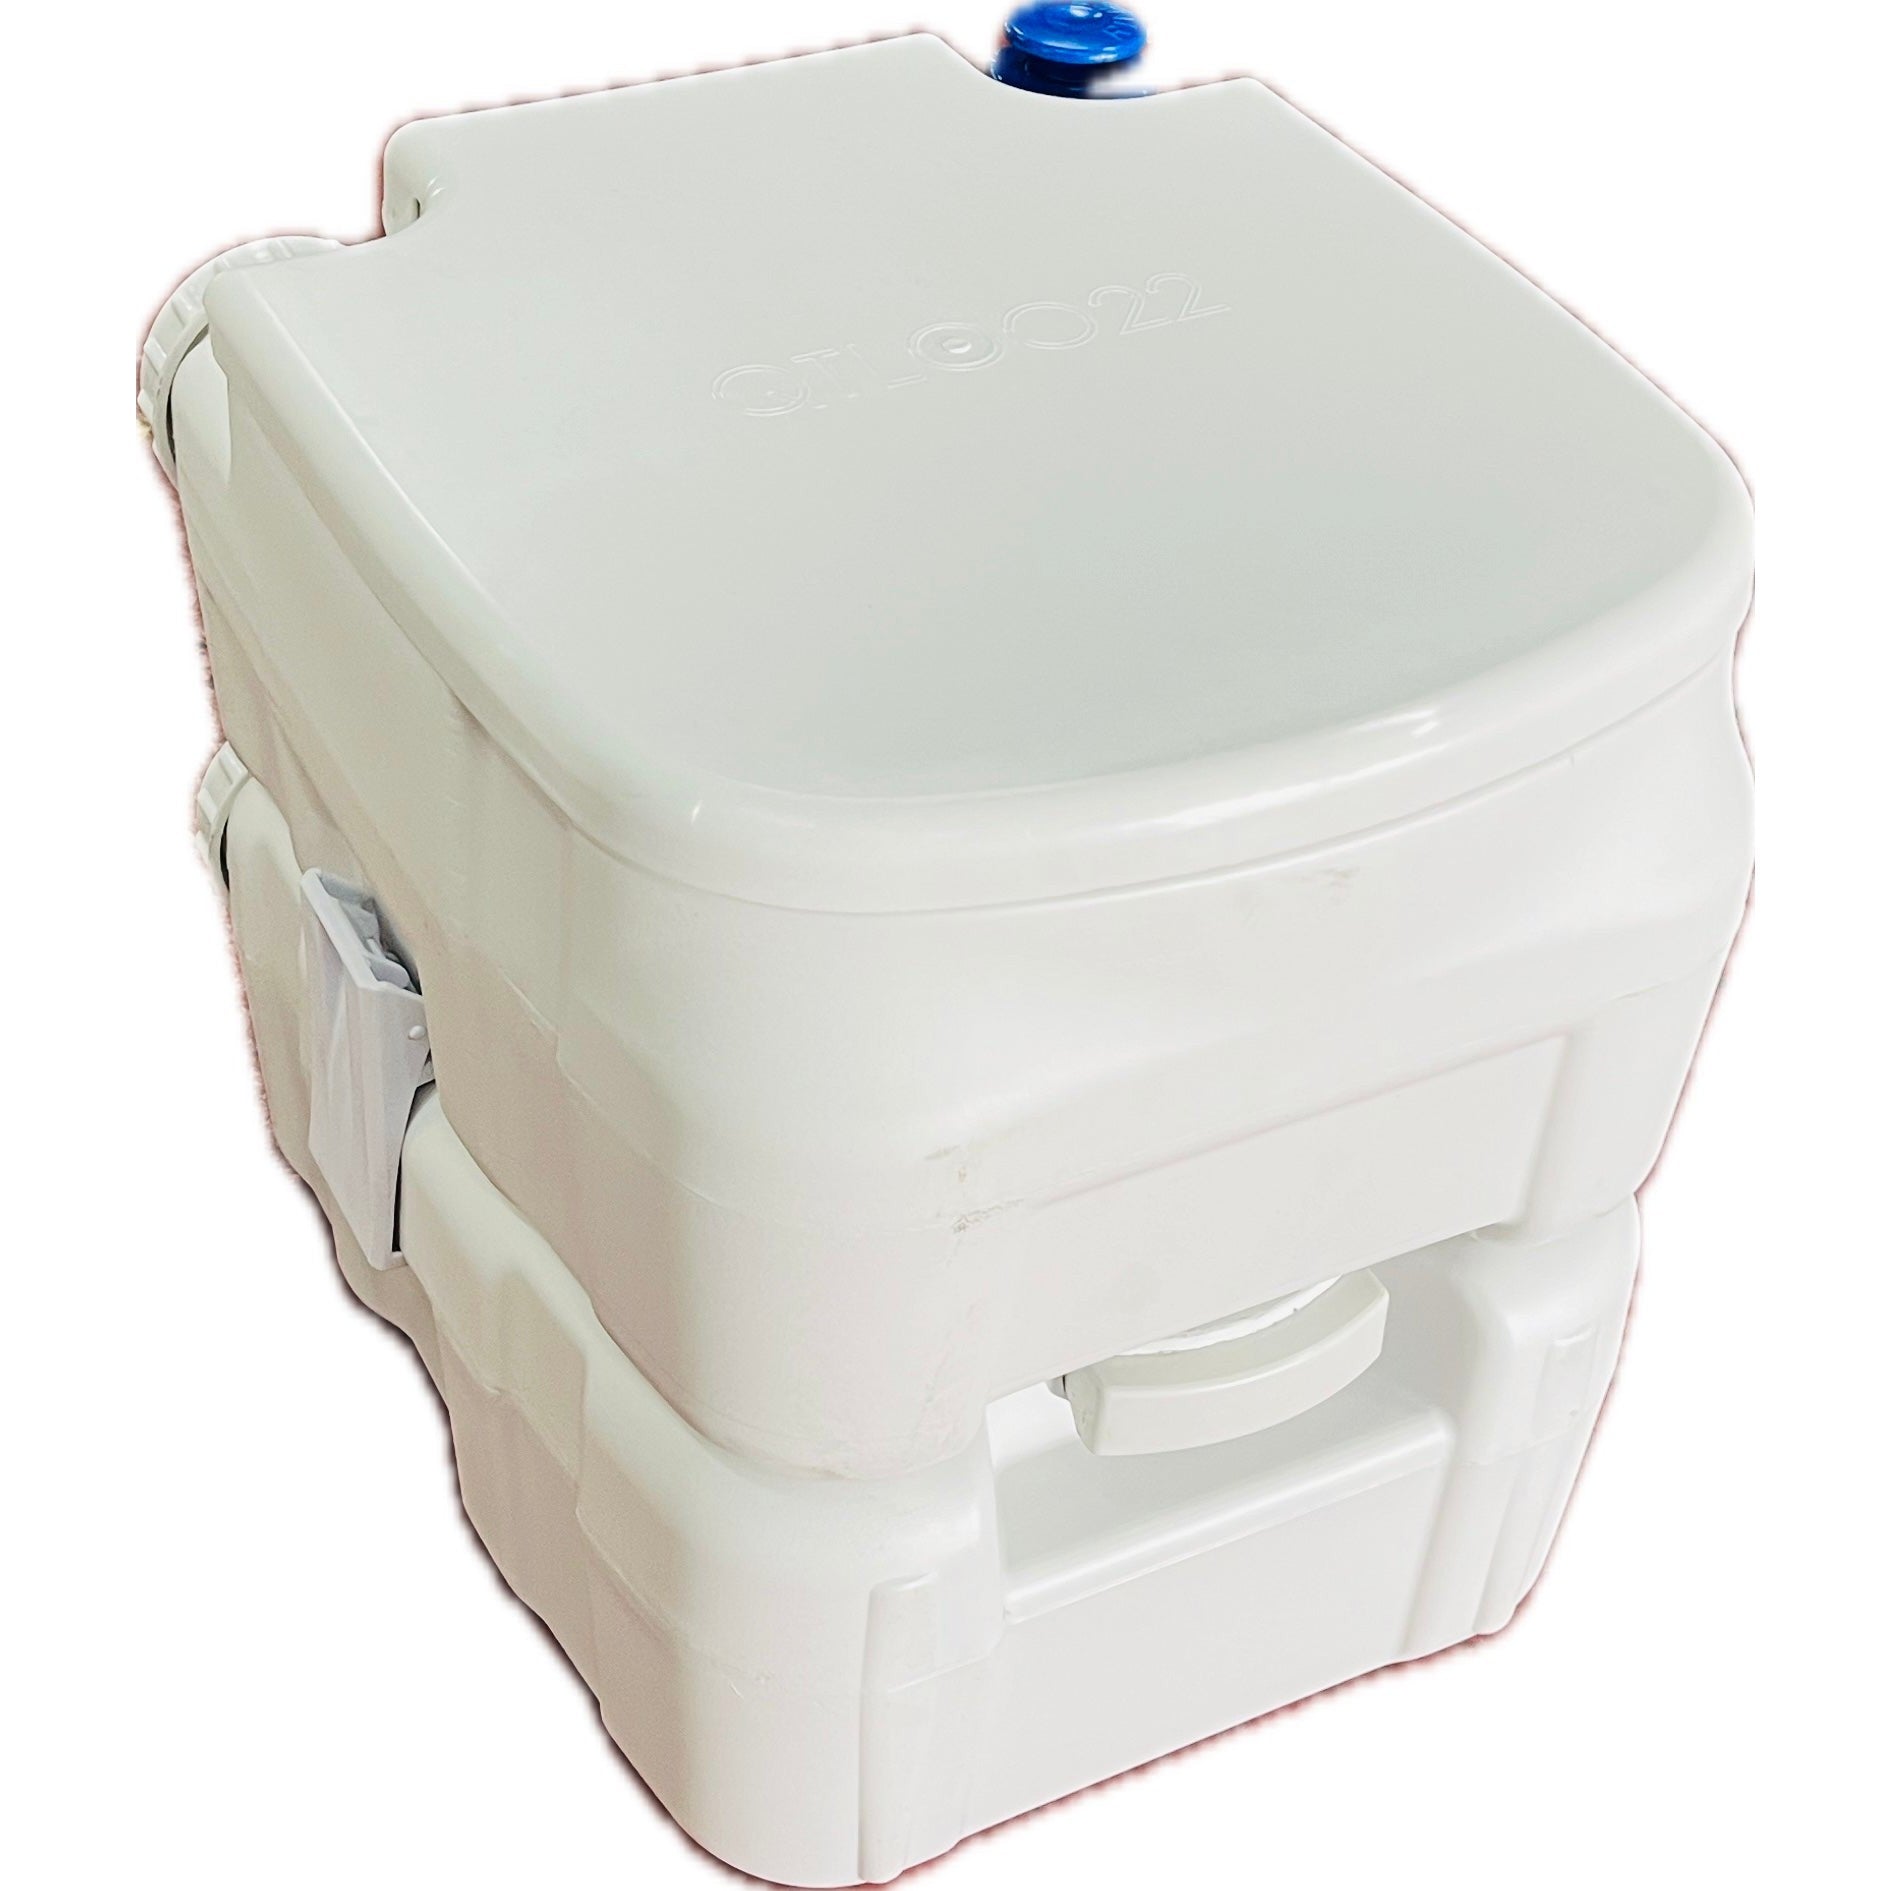 Portable Chemical Toilet QuteeLoo GD